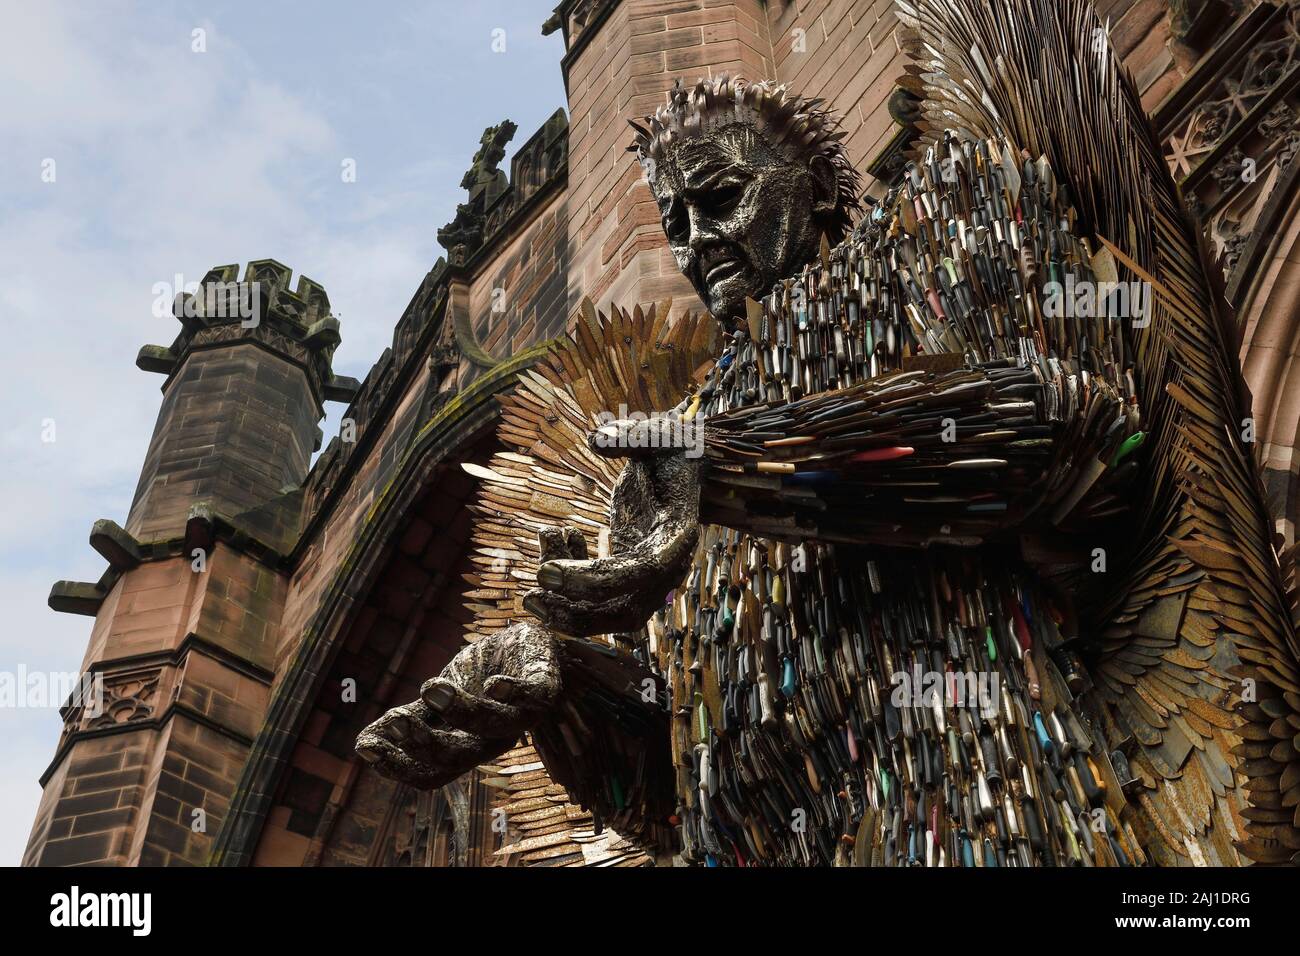 The Knife Angel sculpture by Alfie Bradley standing outside Chester Cathedral during November 2019 Stock Photo